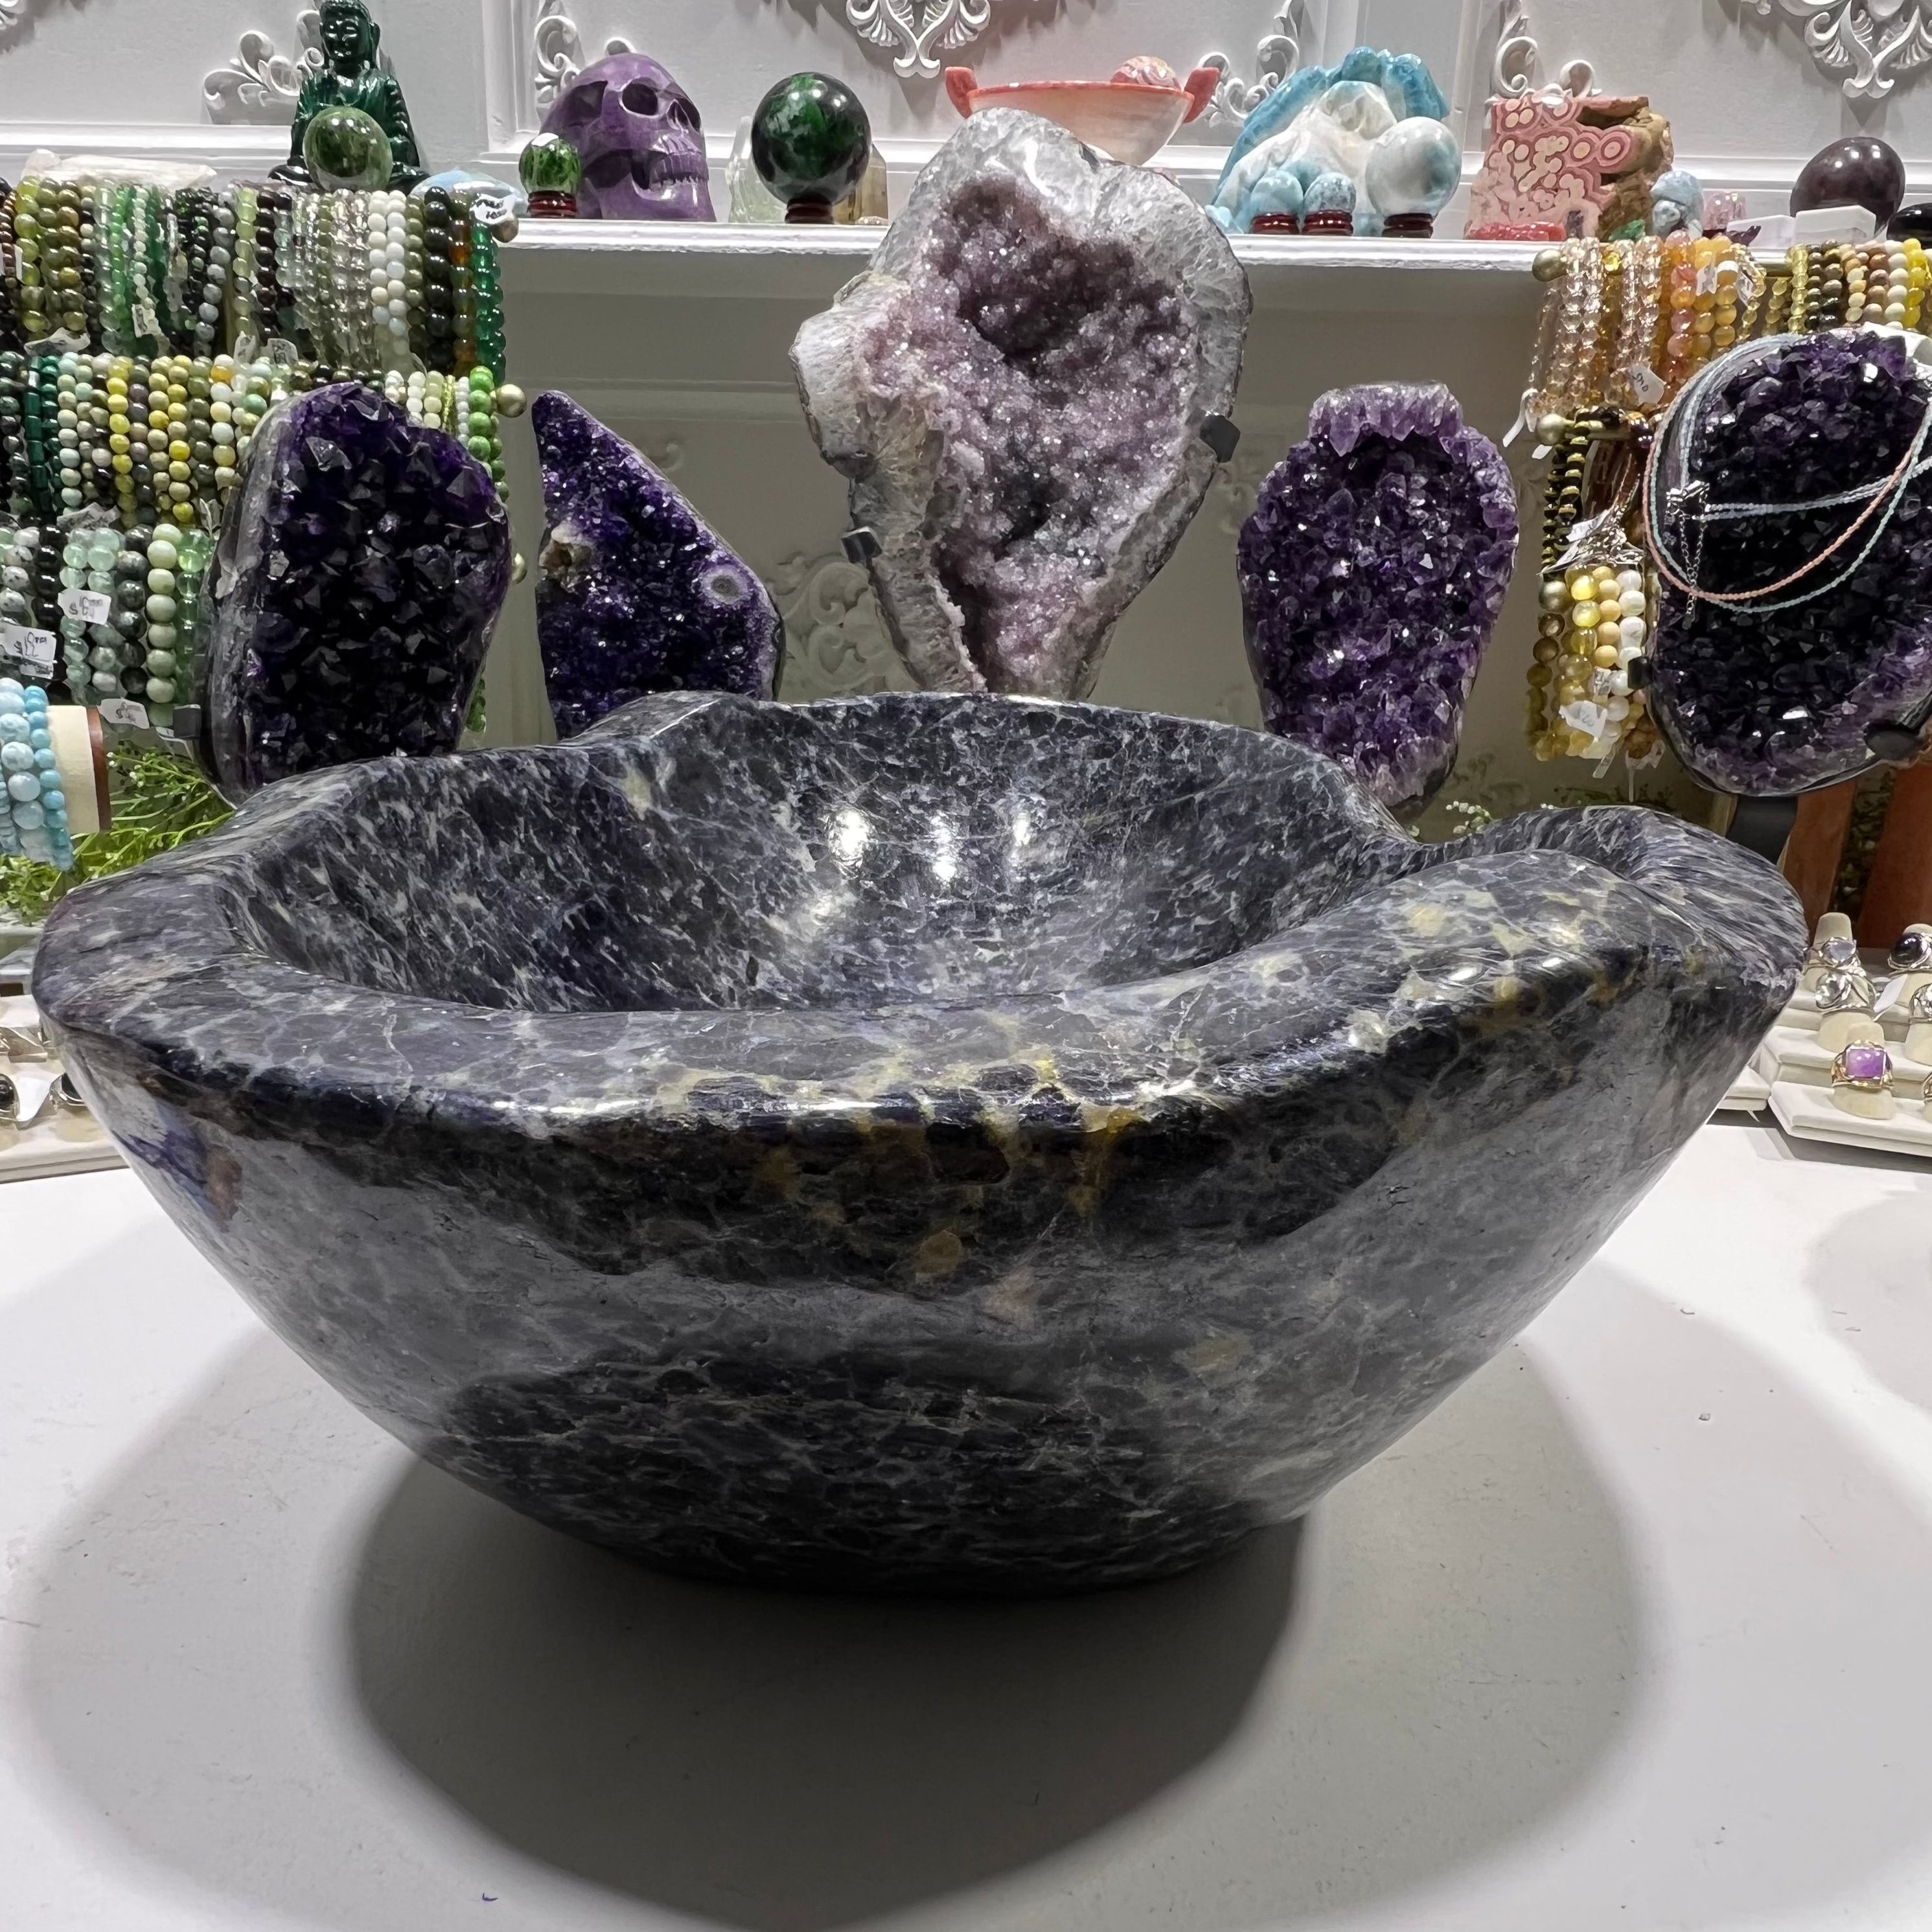 XXL Iolite Bowl for Storing Treasures and a Positive Mindset